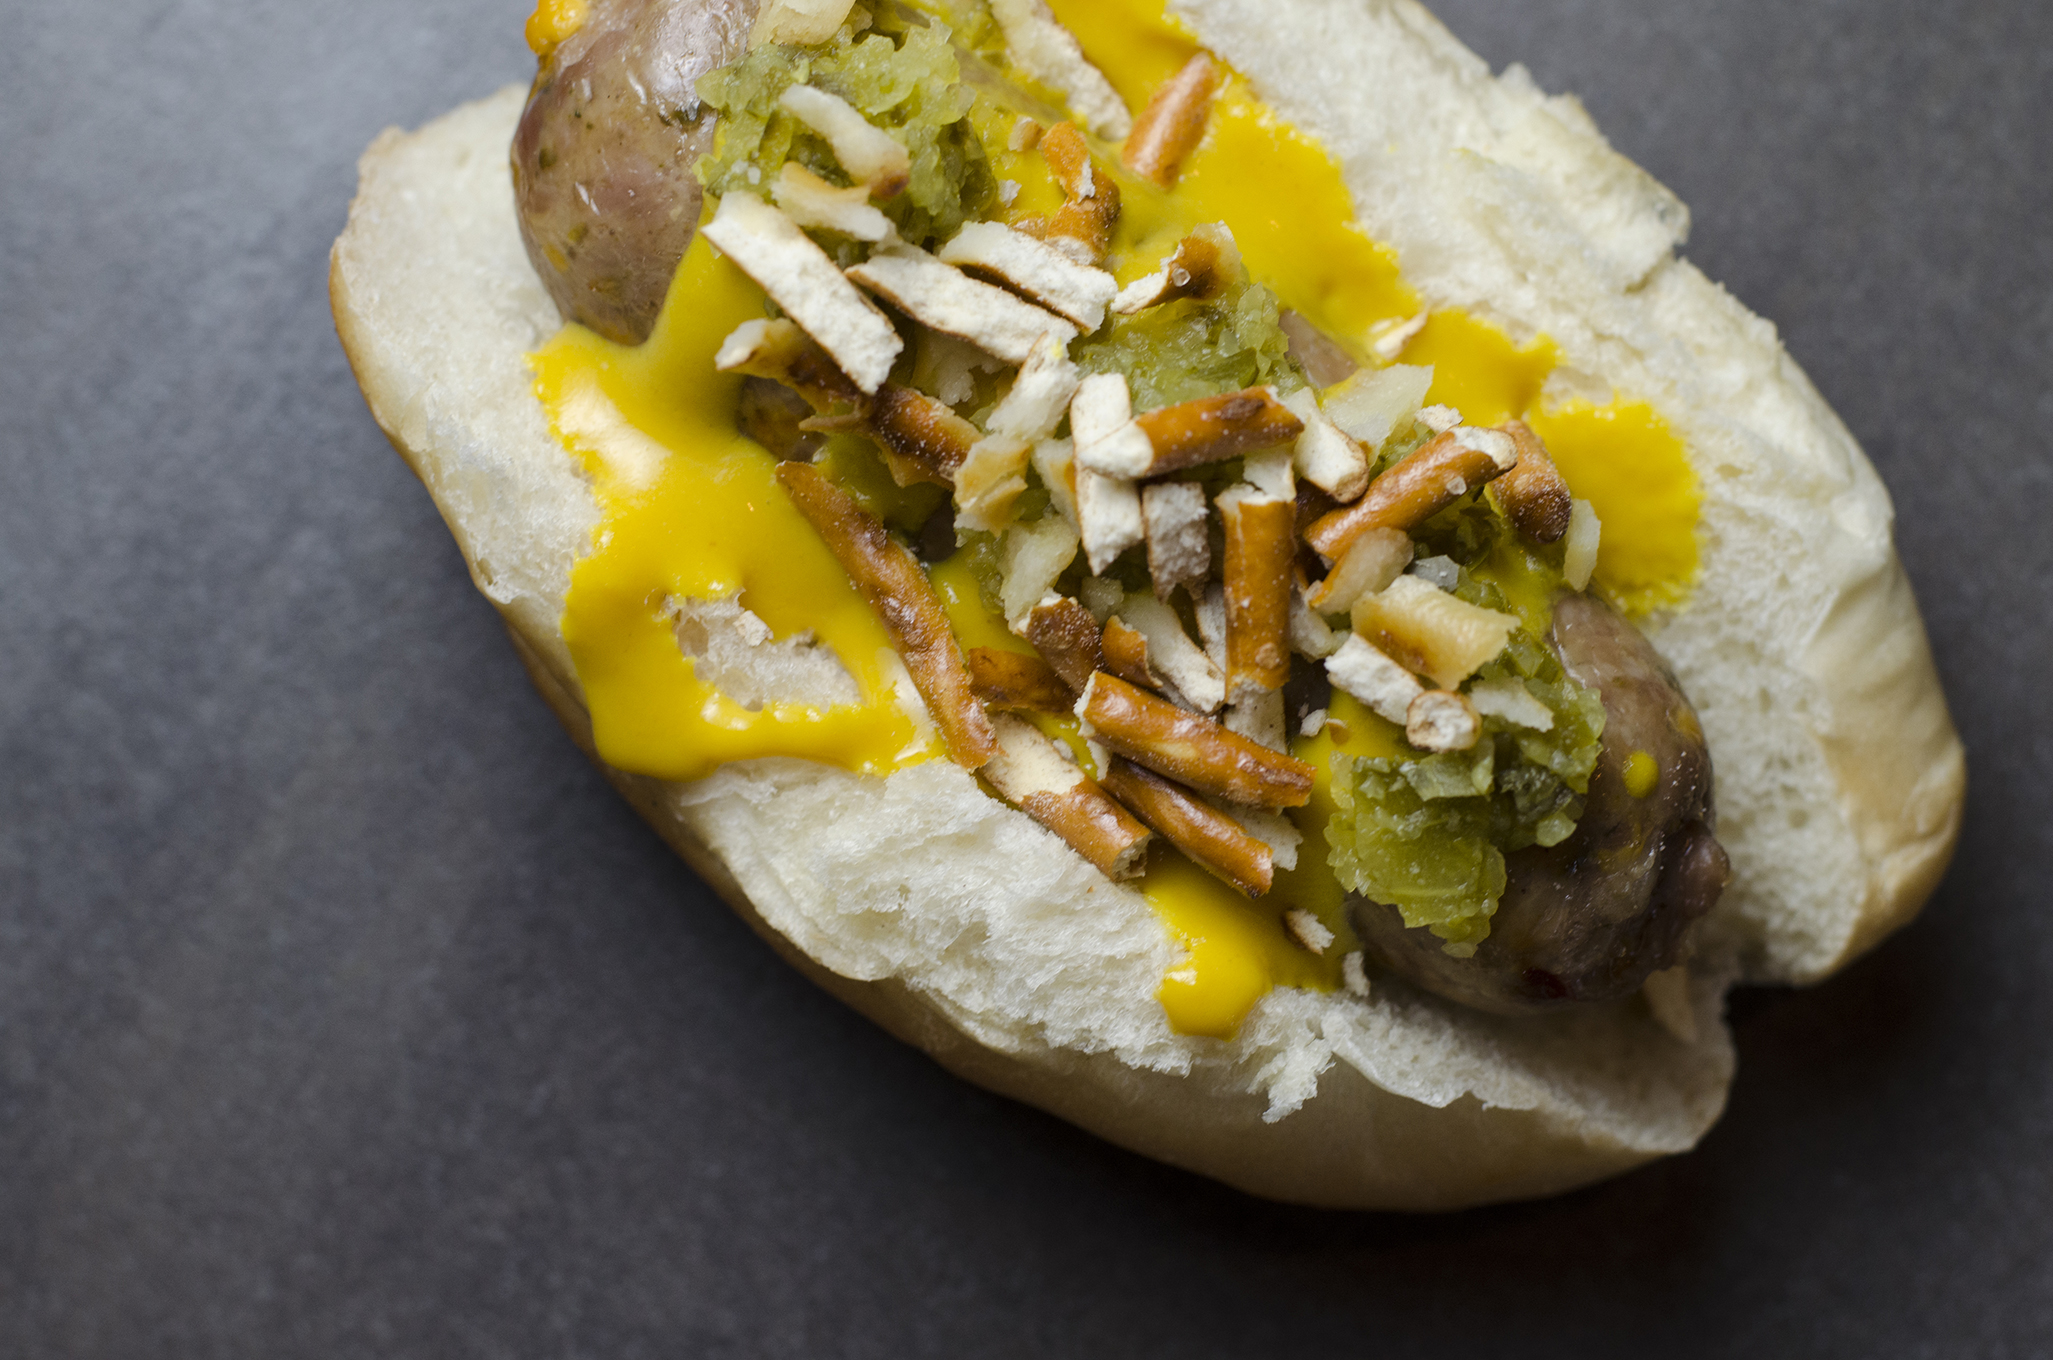 The Jalapeno.Bourbon.Cheddar sausage from Robbie's Gourmet Sausage Co.